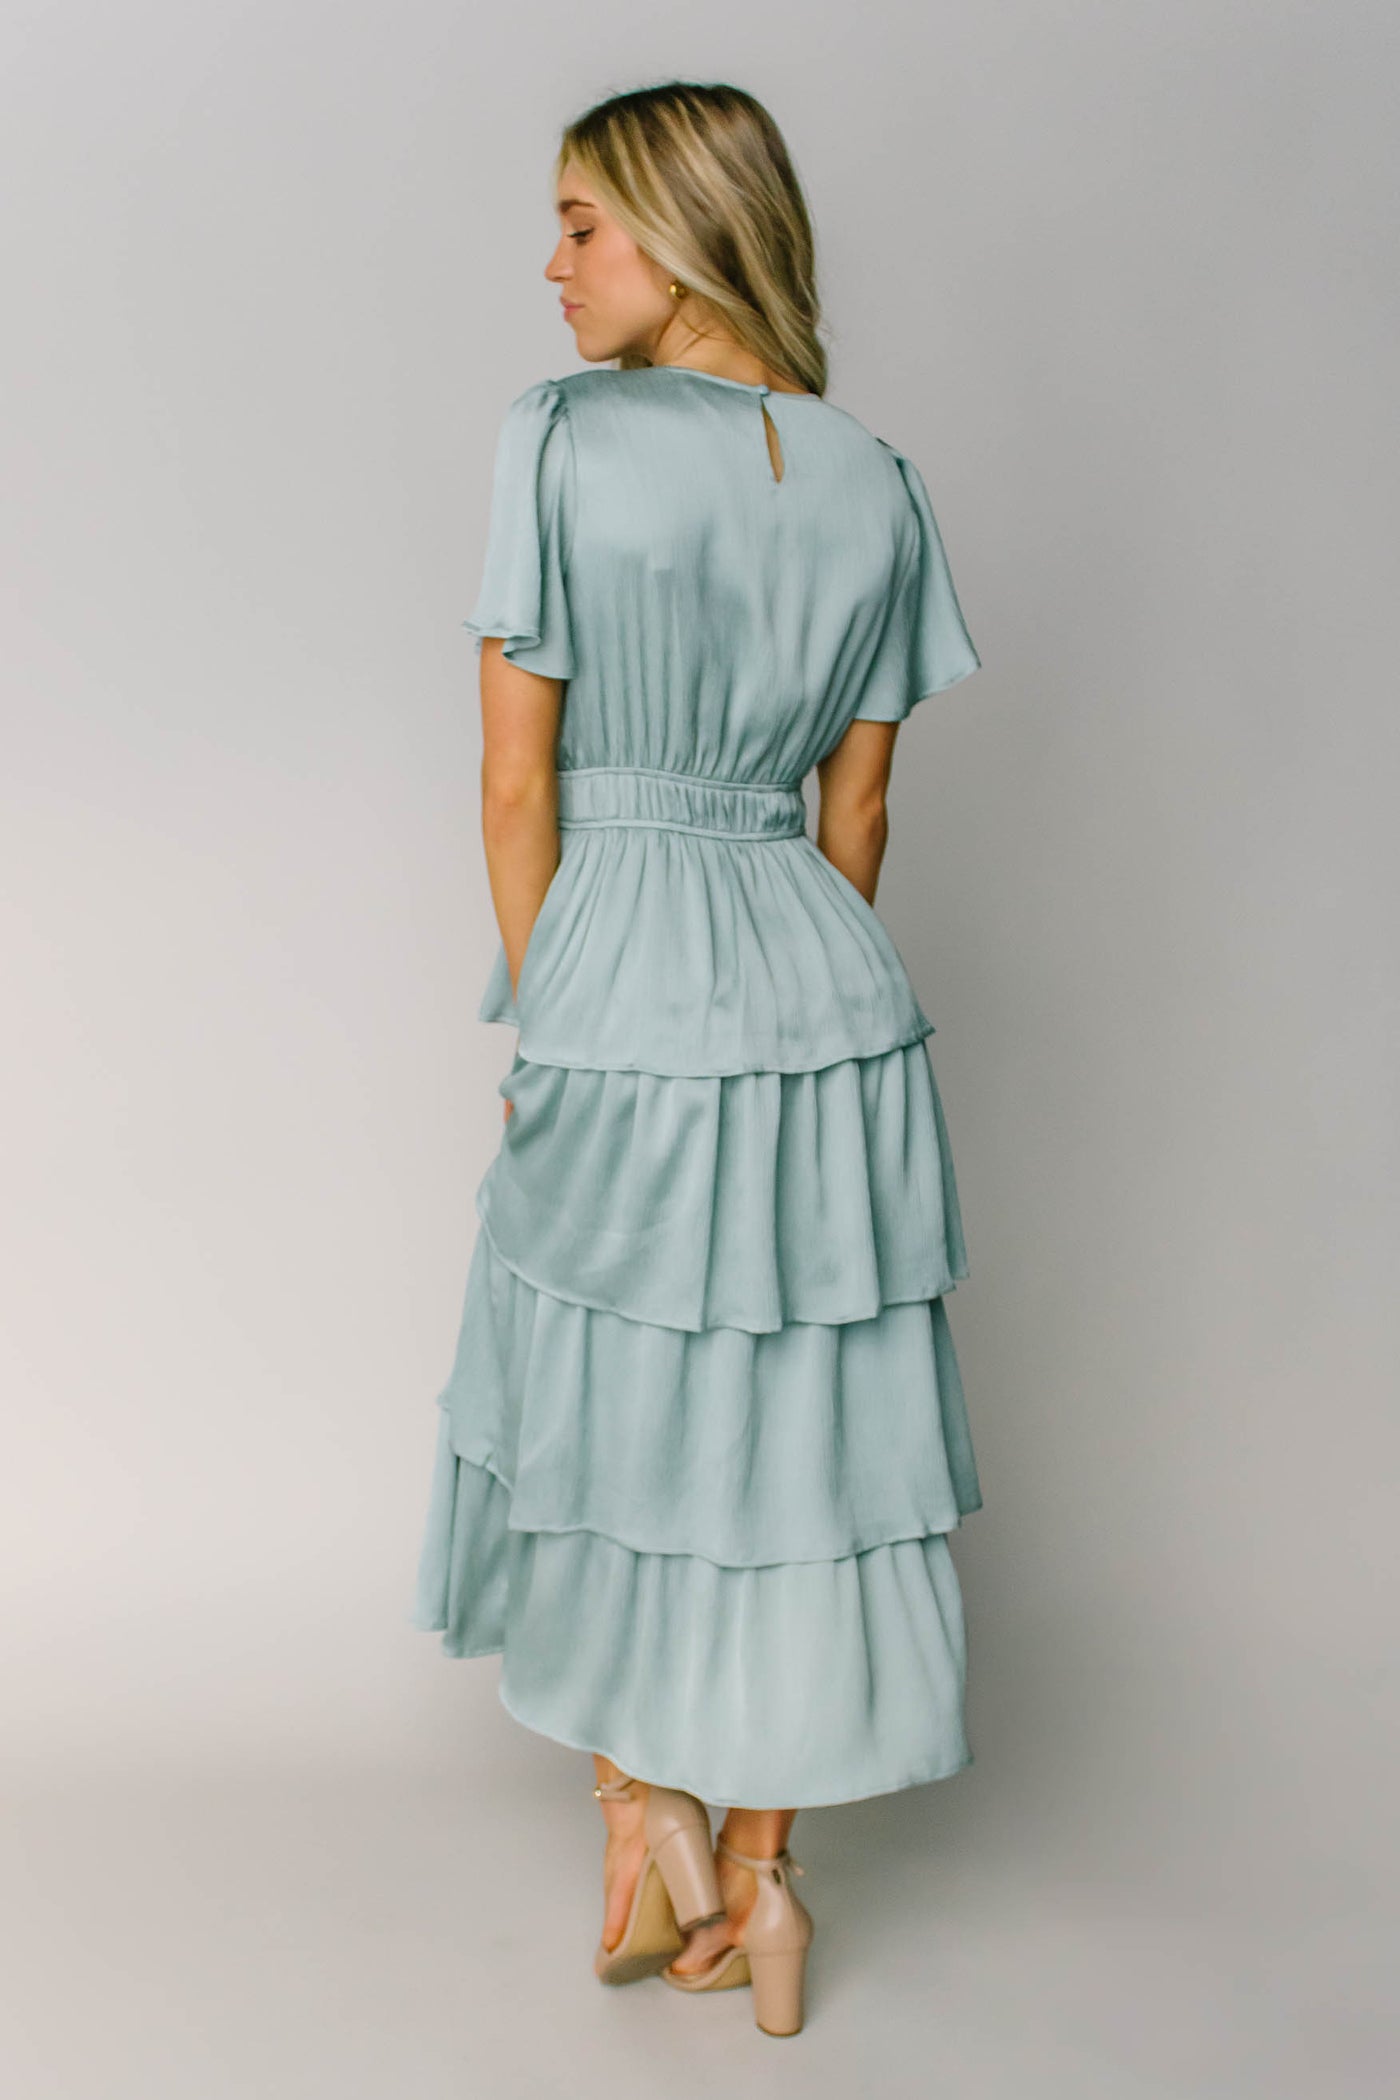 The back of a modest dress made out of a silky blue fabric, layered tiers, a keyhole, and a defined waist.